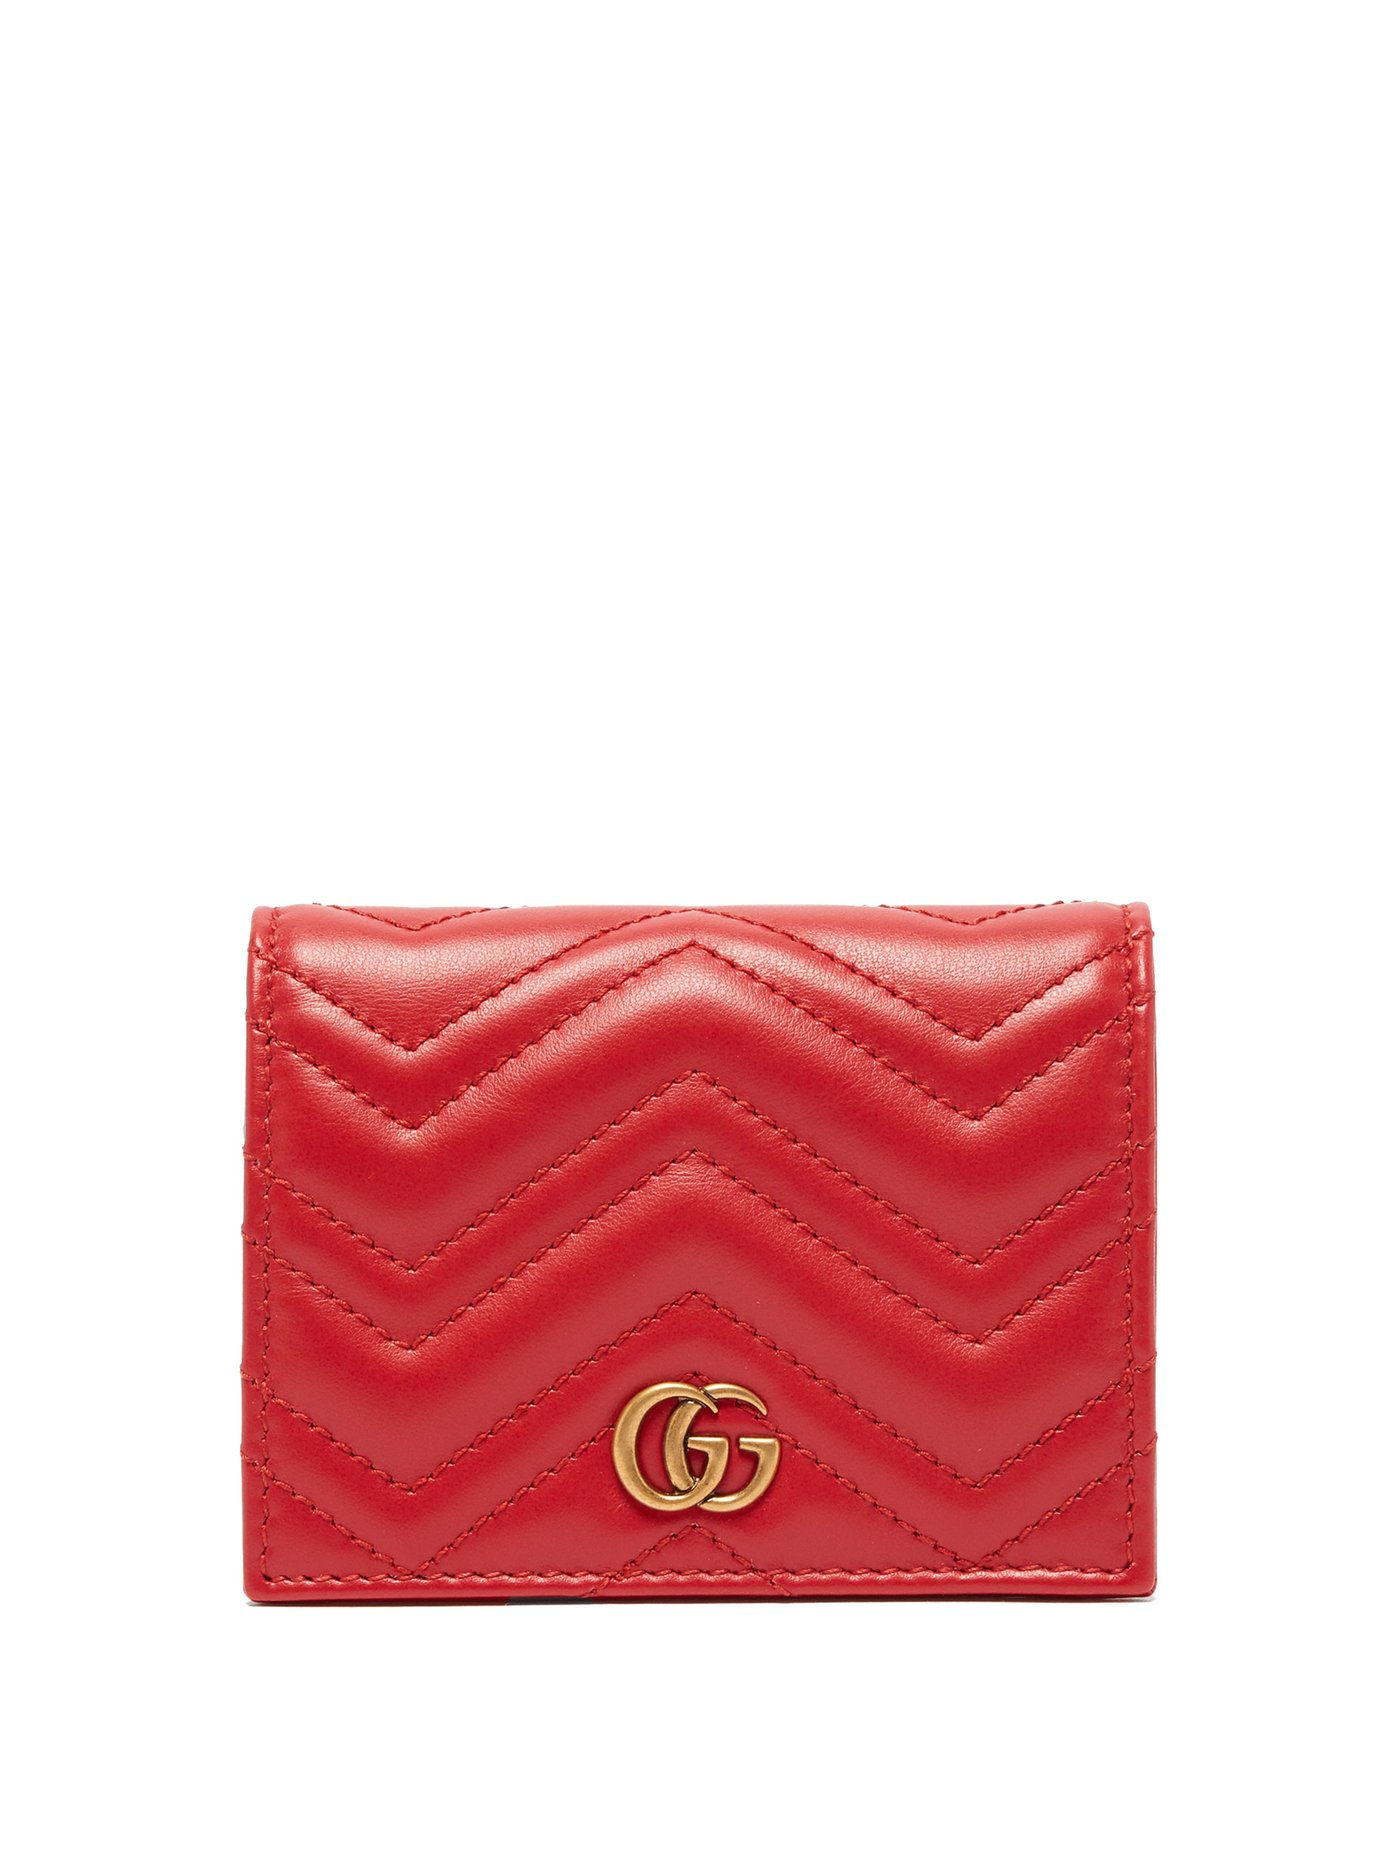 gucci gg marmont leather wallet